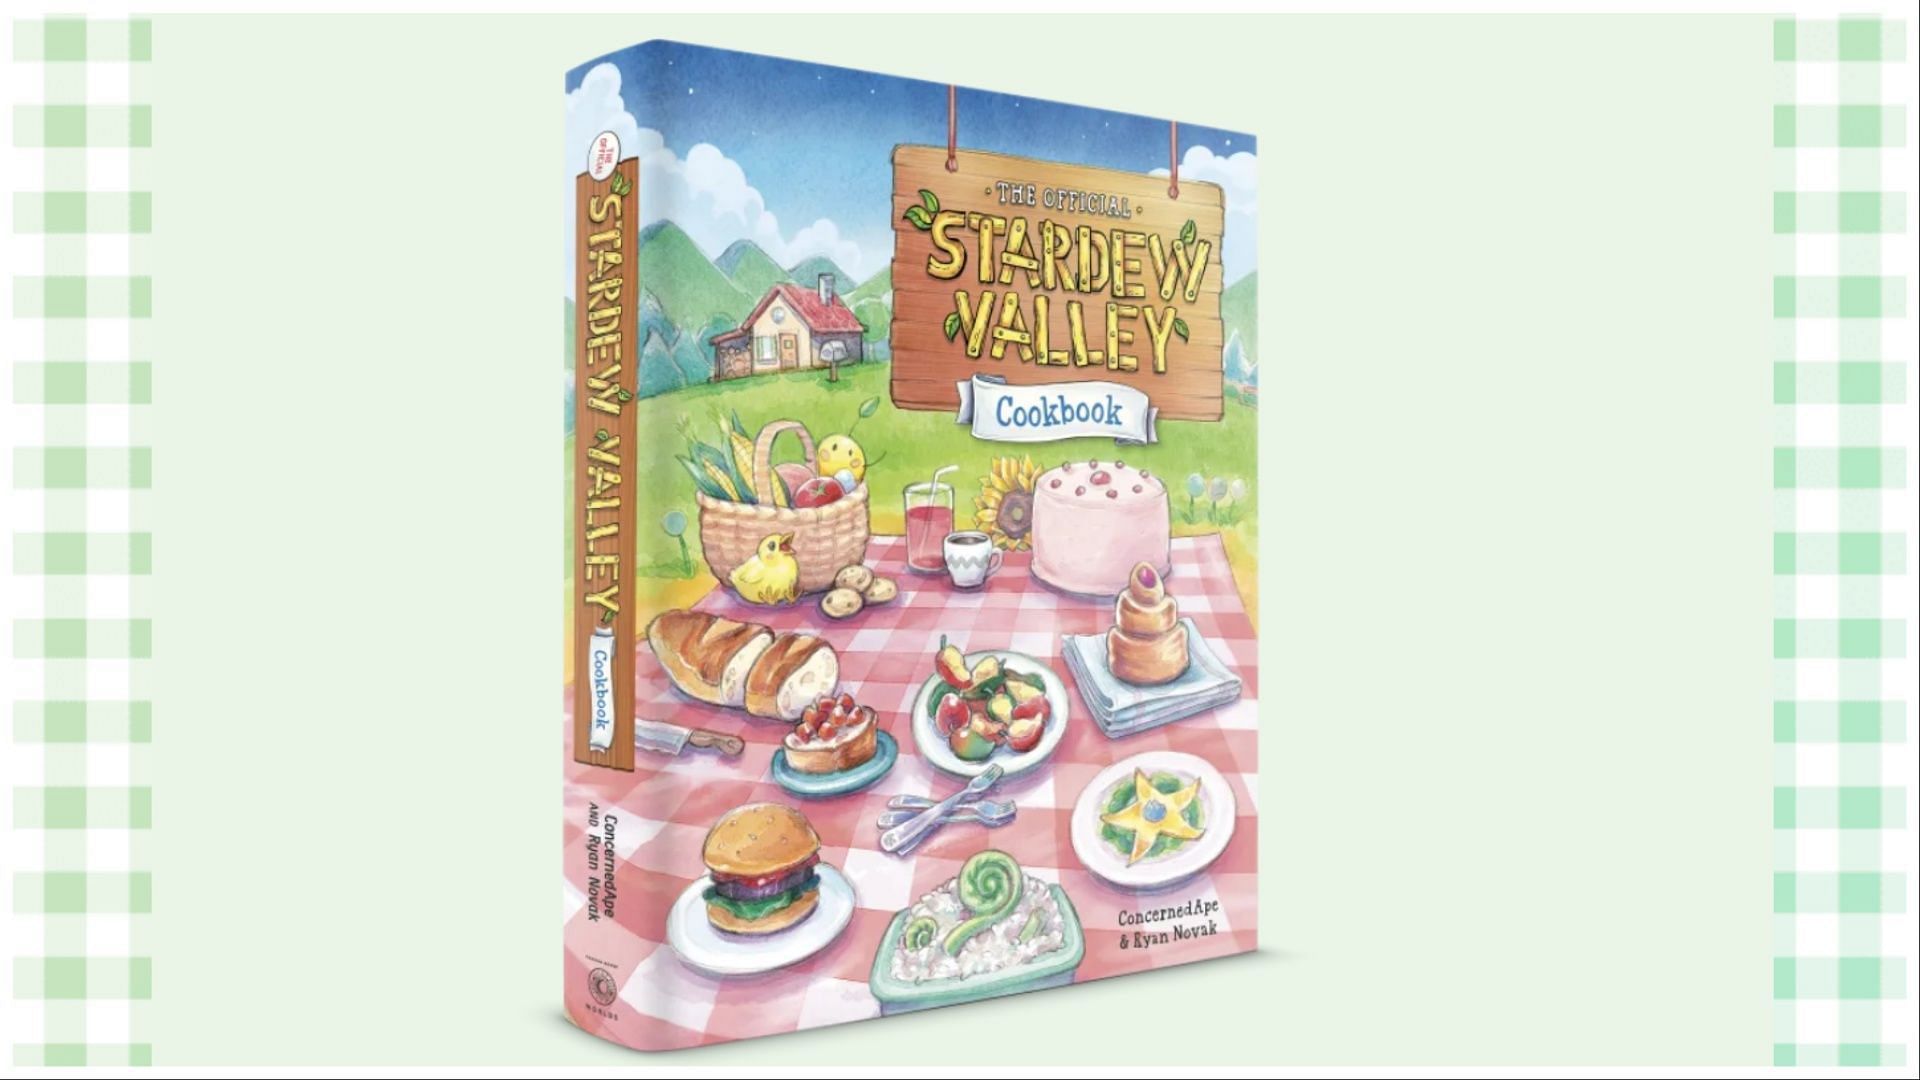 The official Stardew Valley Cookbook has over 50 recipes.